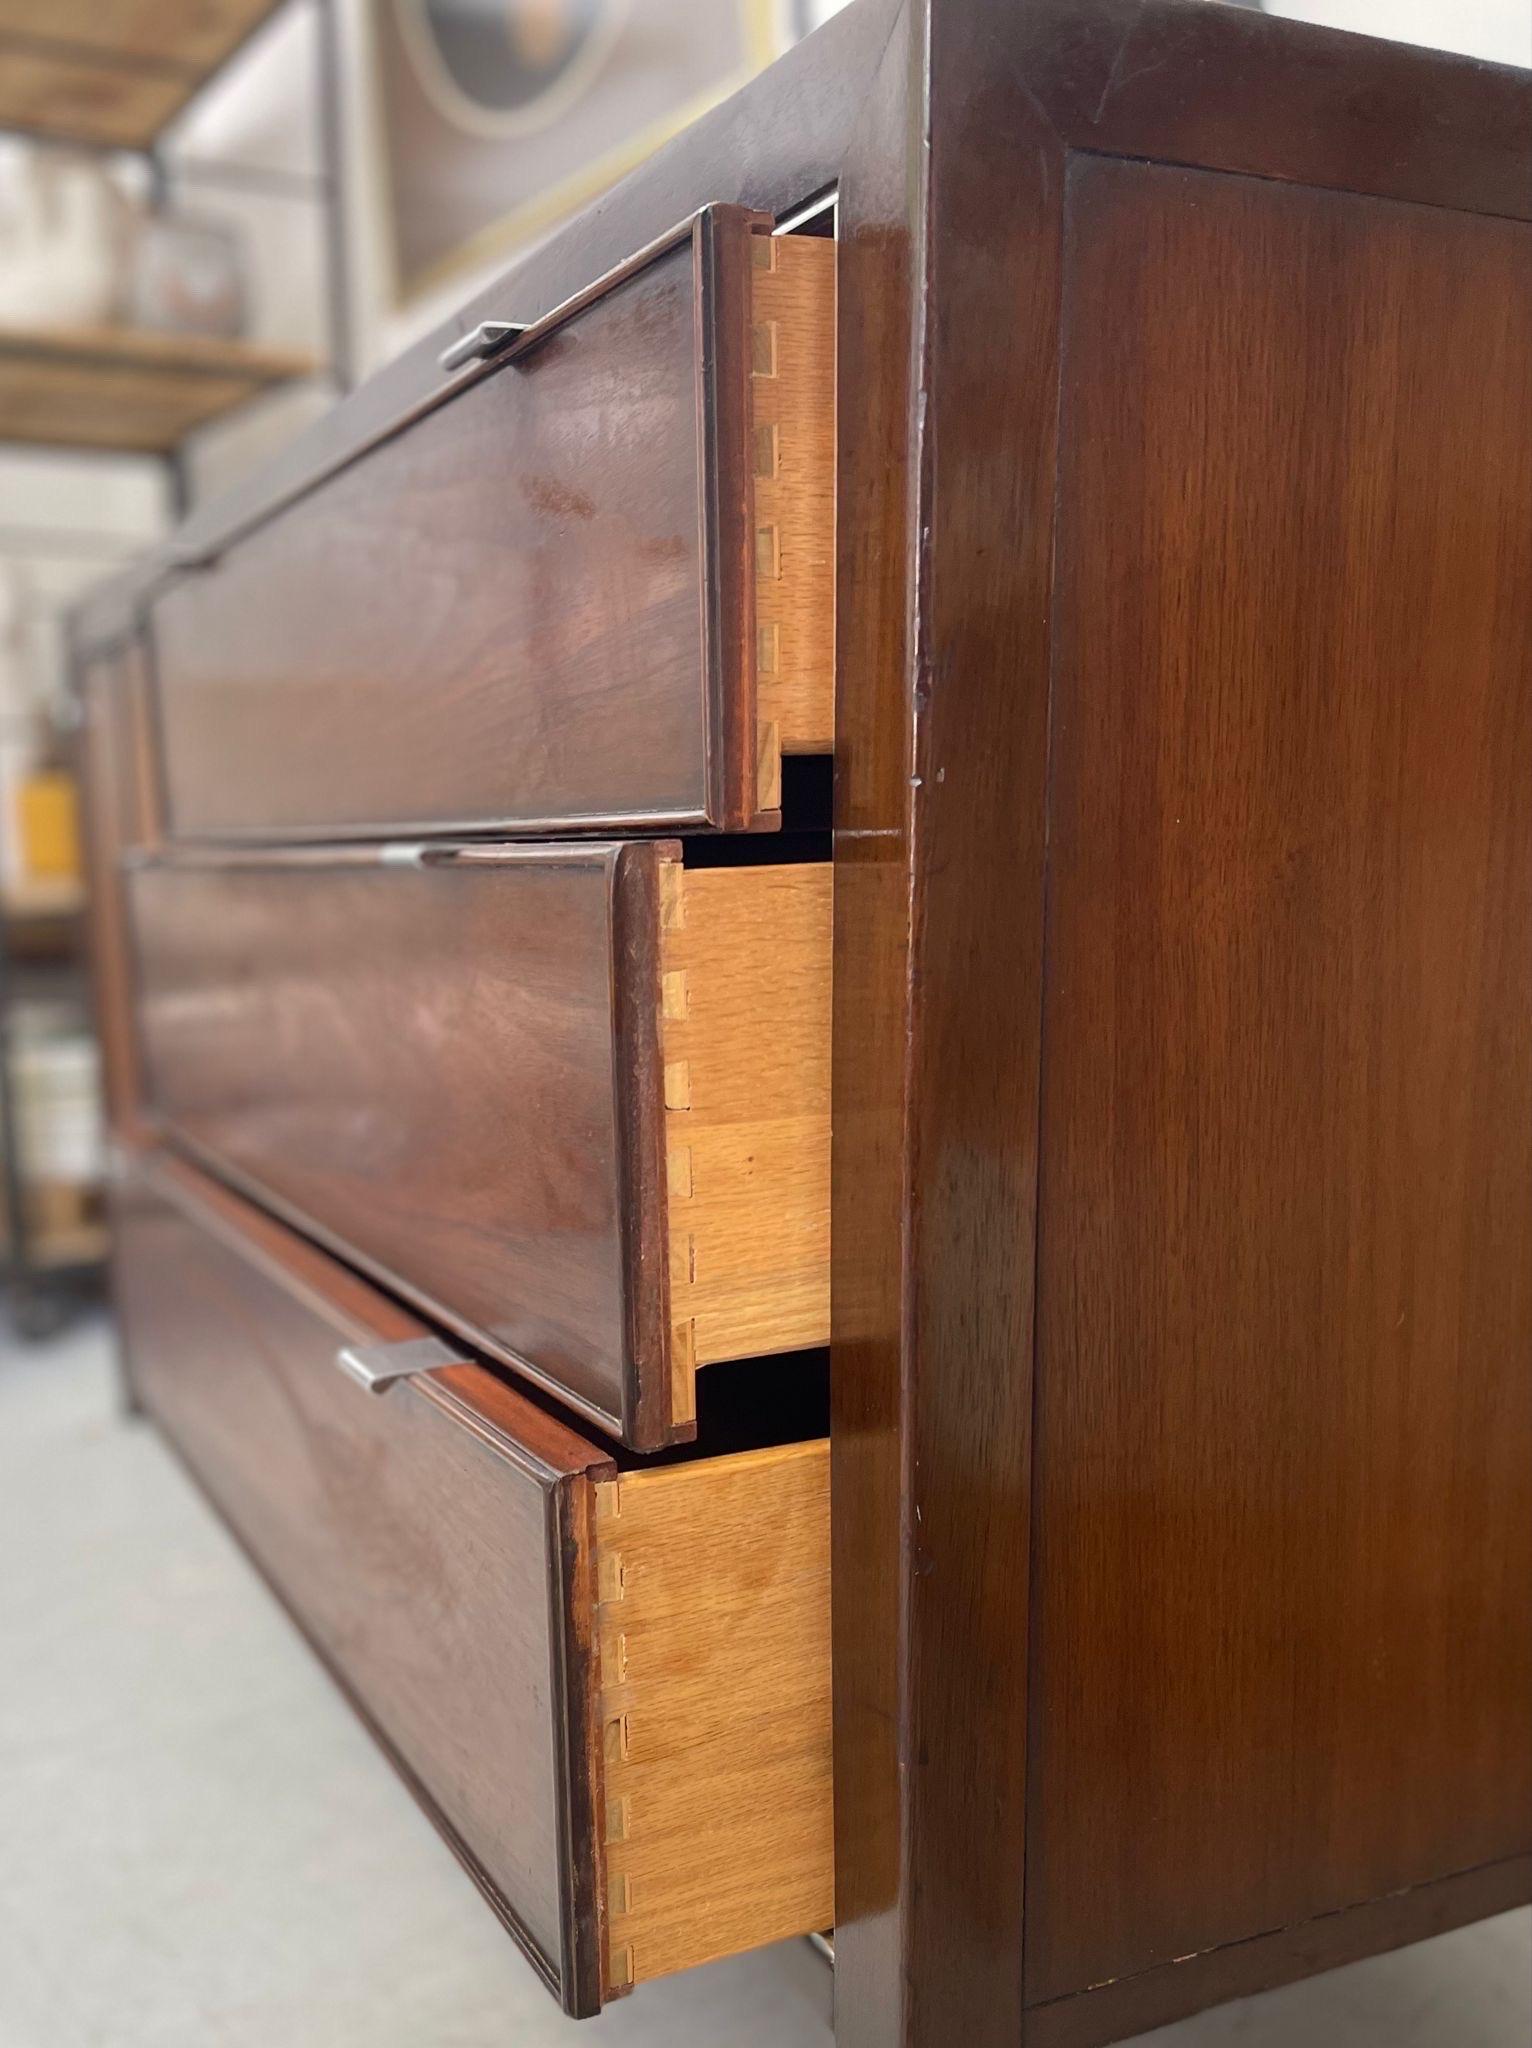 Walnut Vintage Mid Century Modern Drexel Credenza Cabinet With Chrome Toned Hardware. For Sale